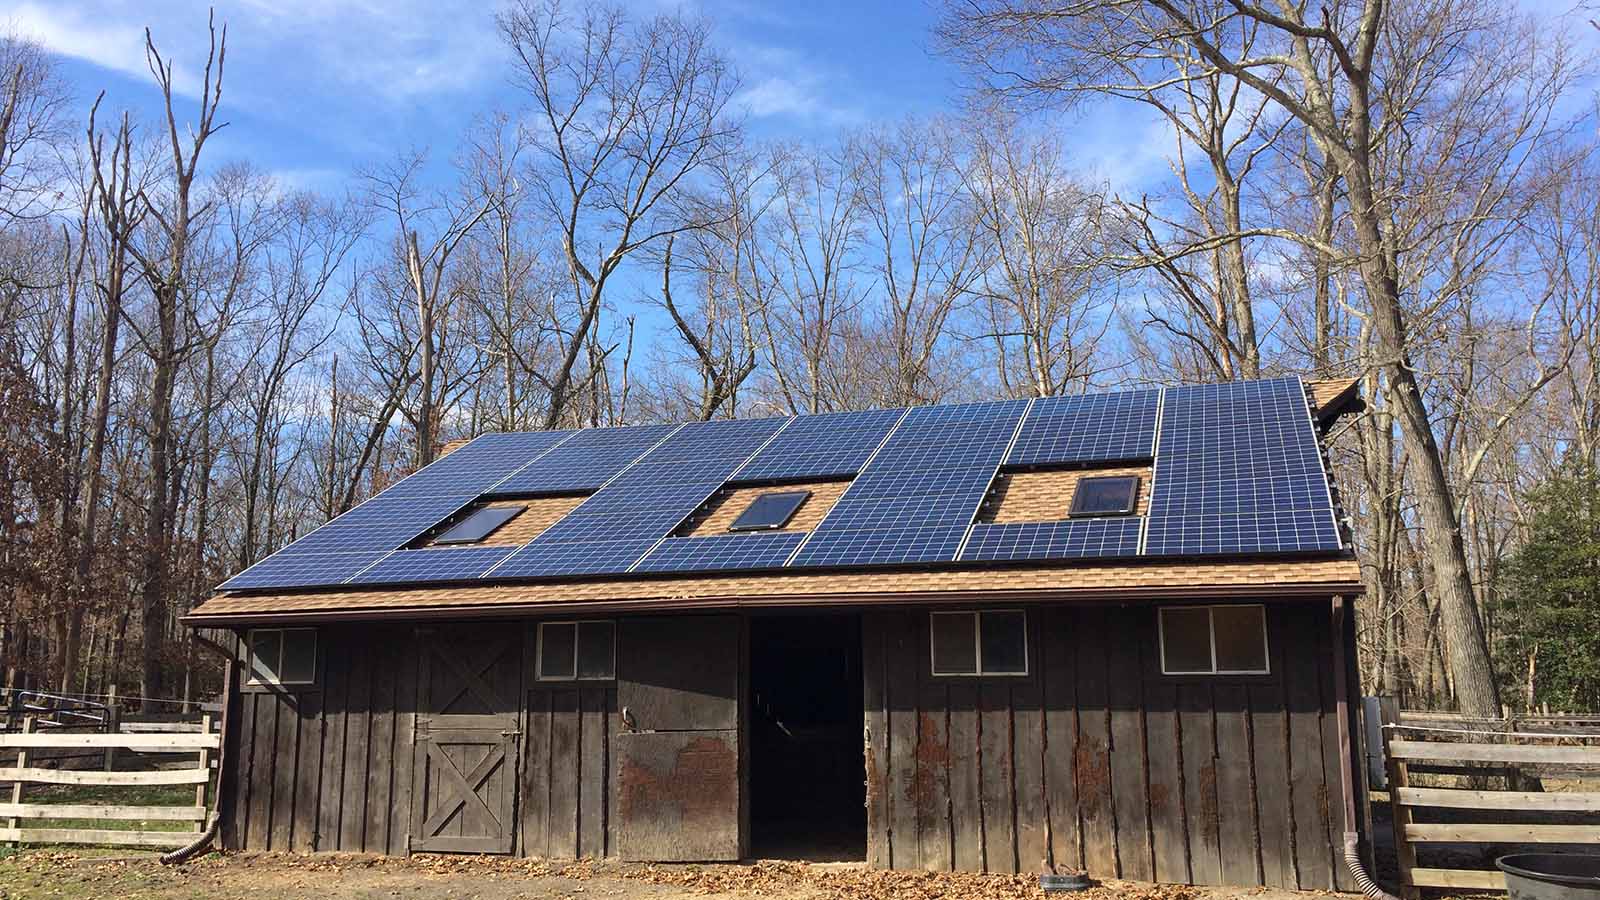 Roof mounted solar panels on a barn